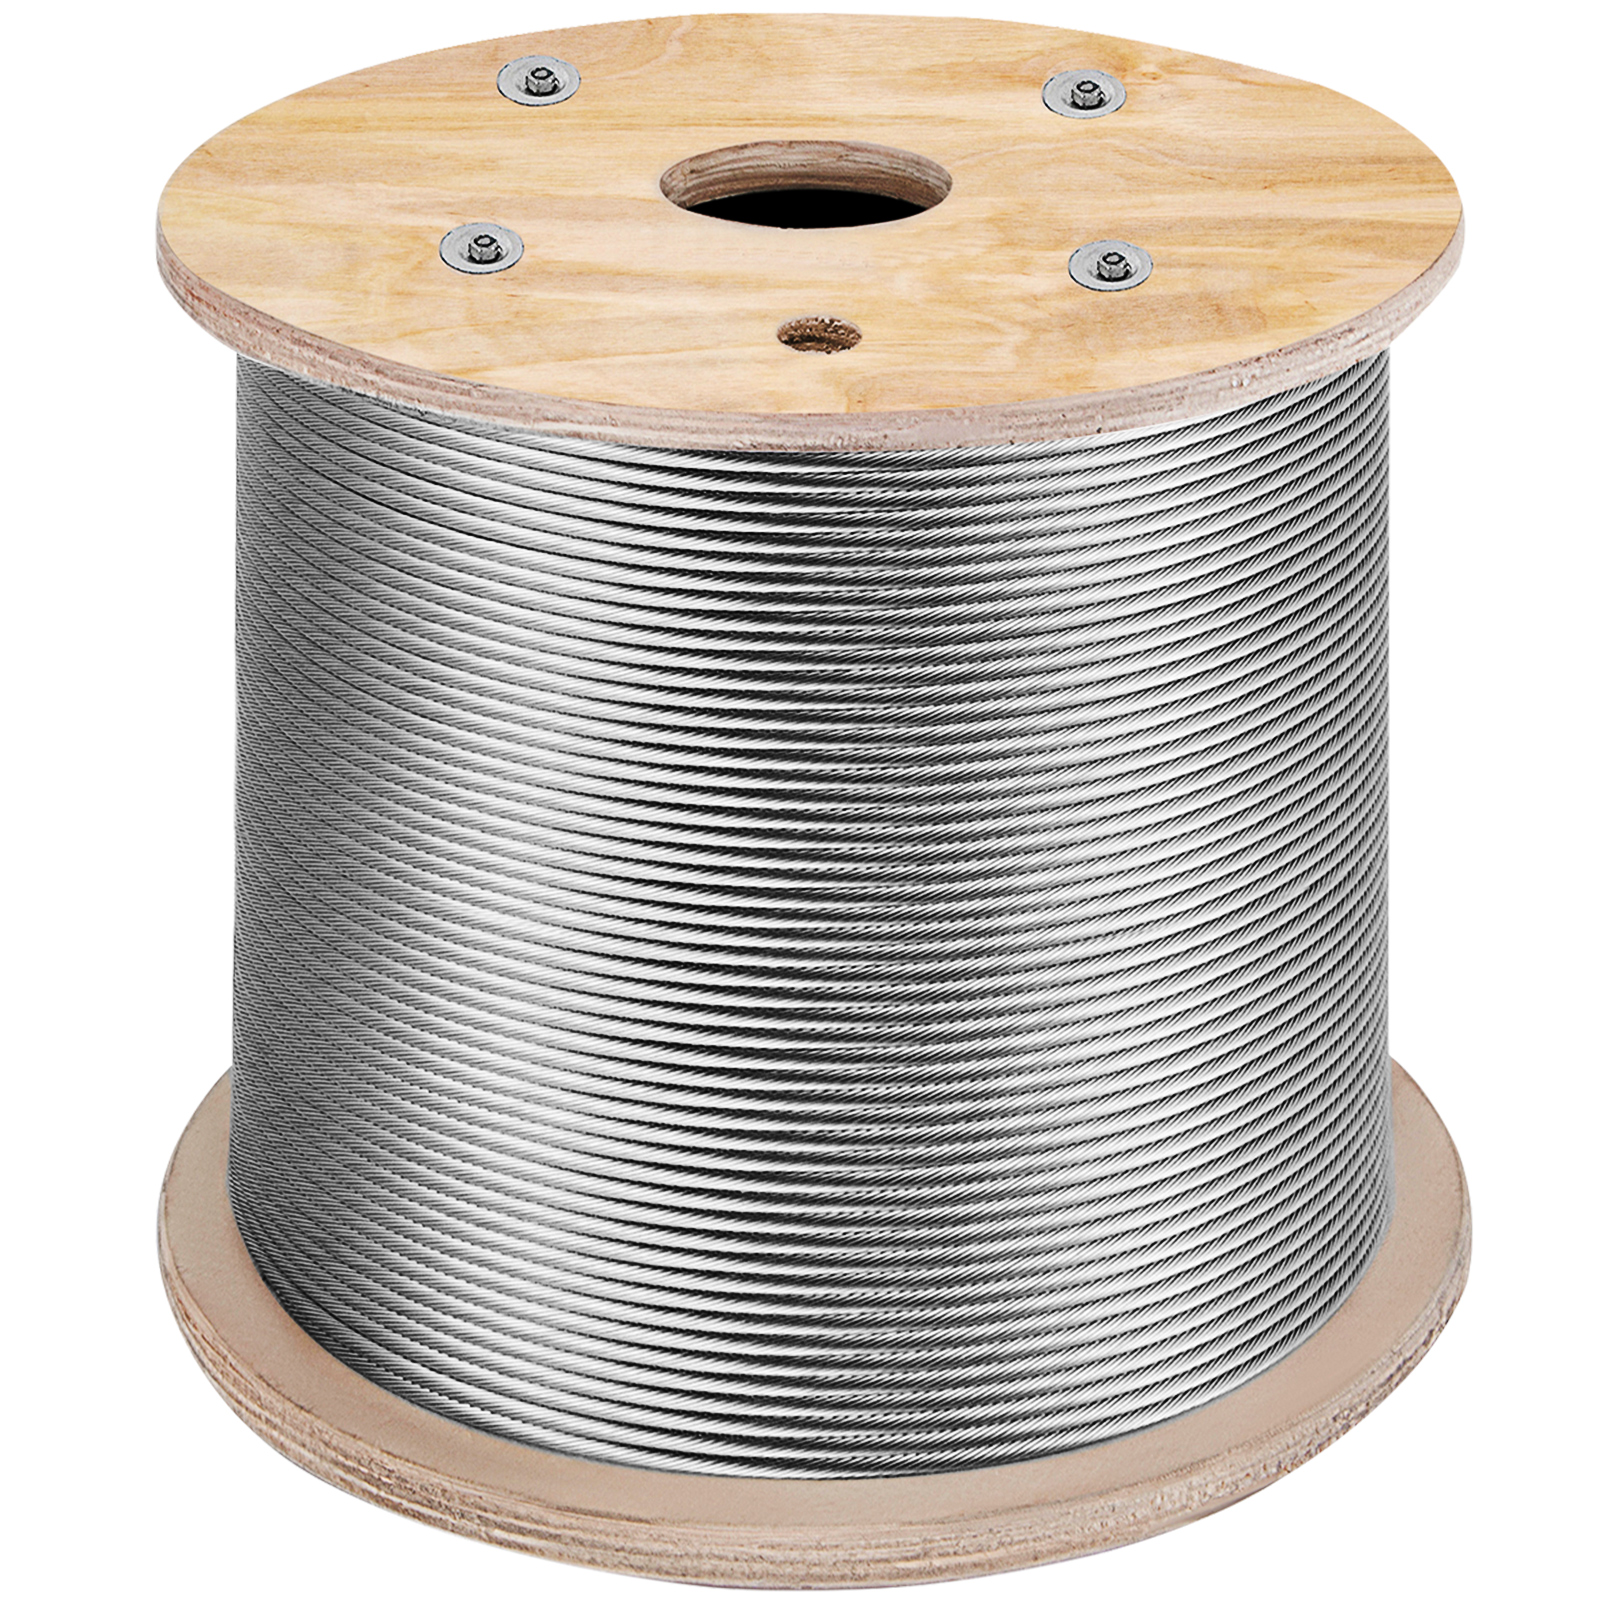 3/16 Stainless Steel Cable Wire Rope 1x19 Type 316 (1000 Feet) от Vevor Many GEOs